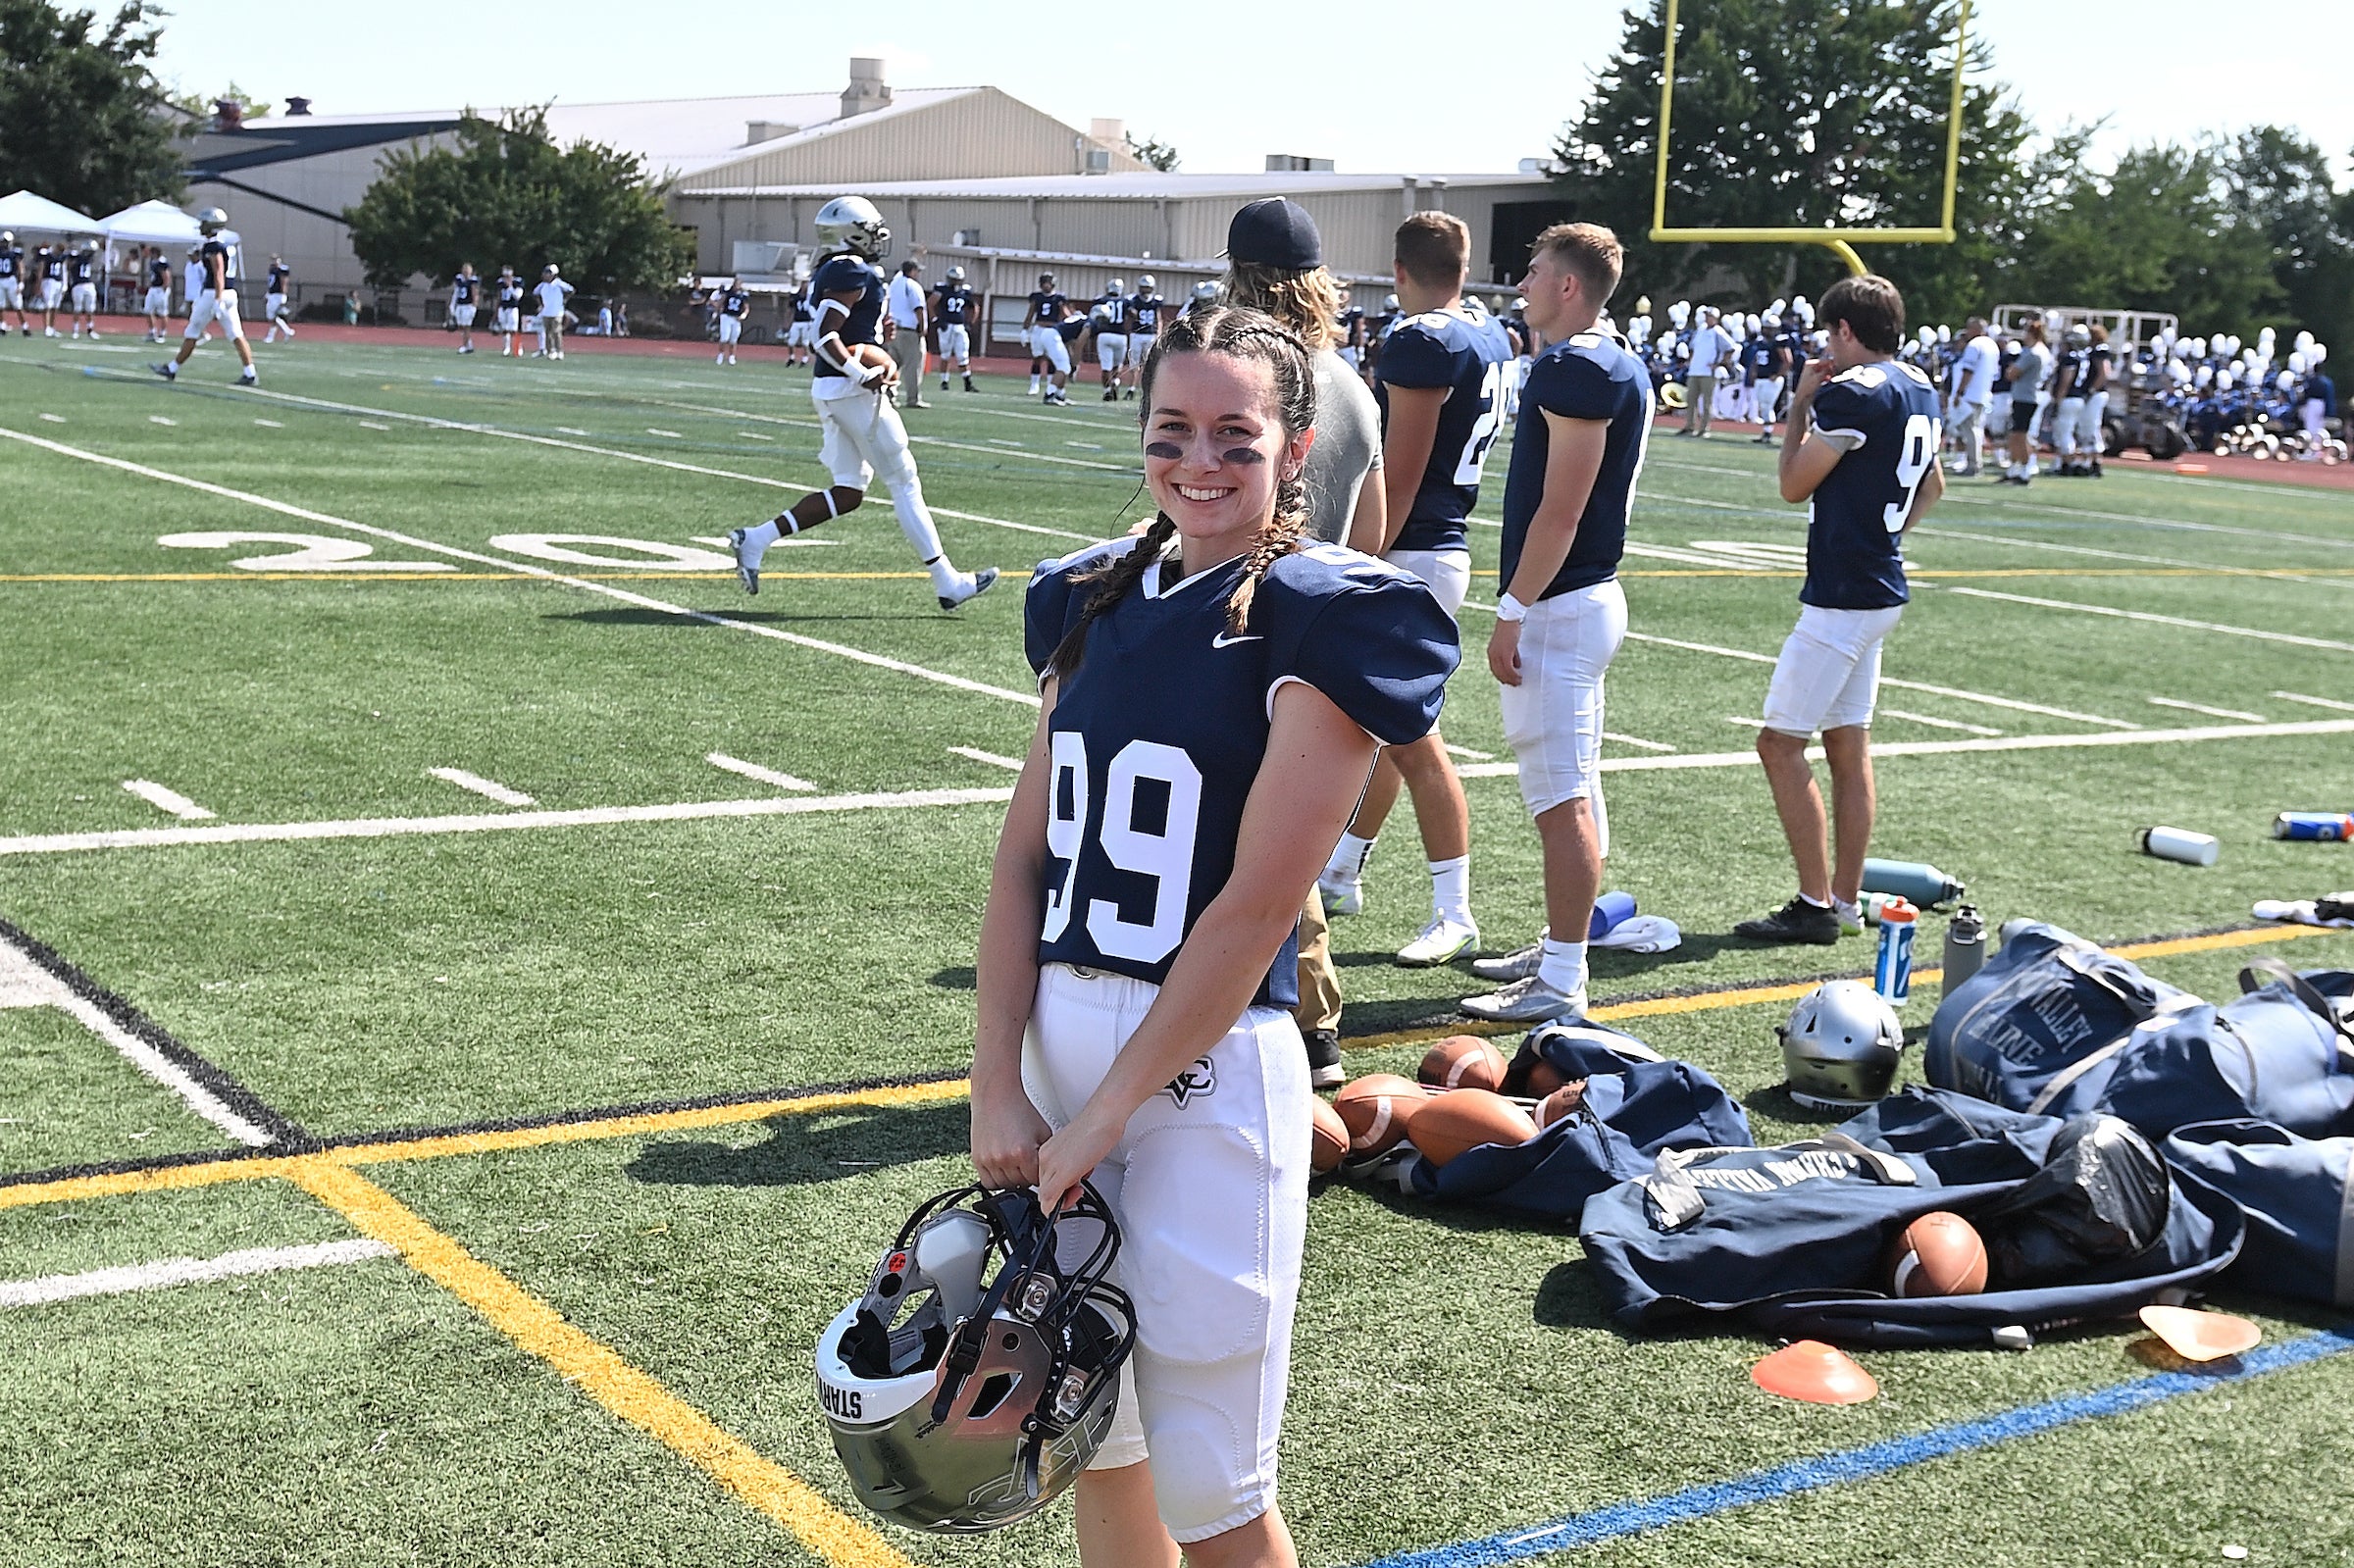 LVC football player poses on field